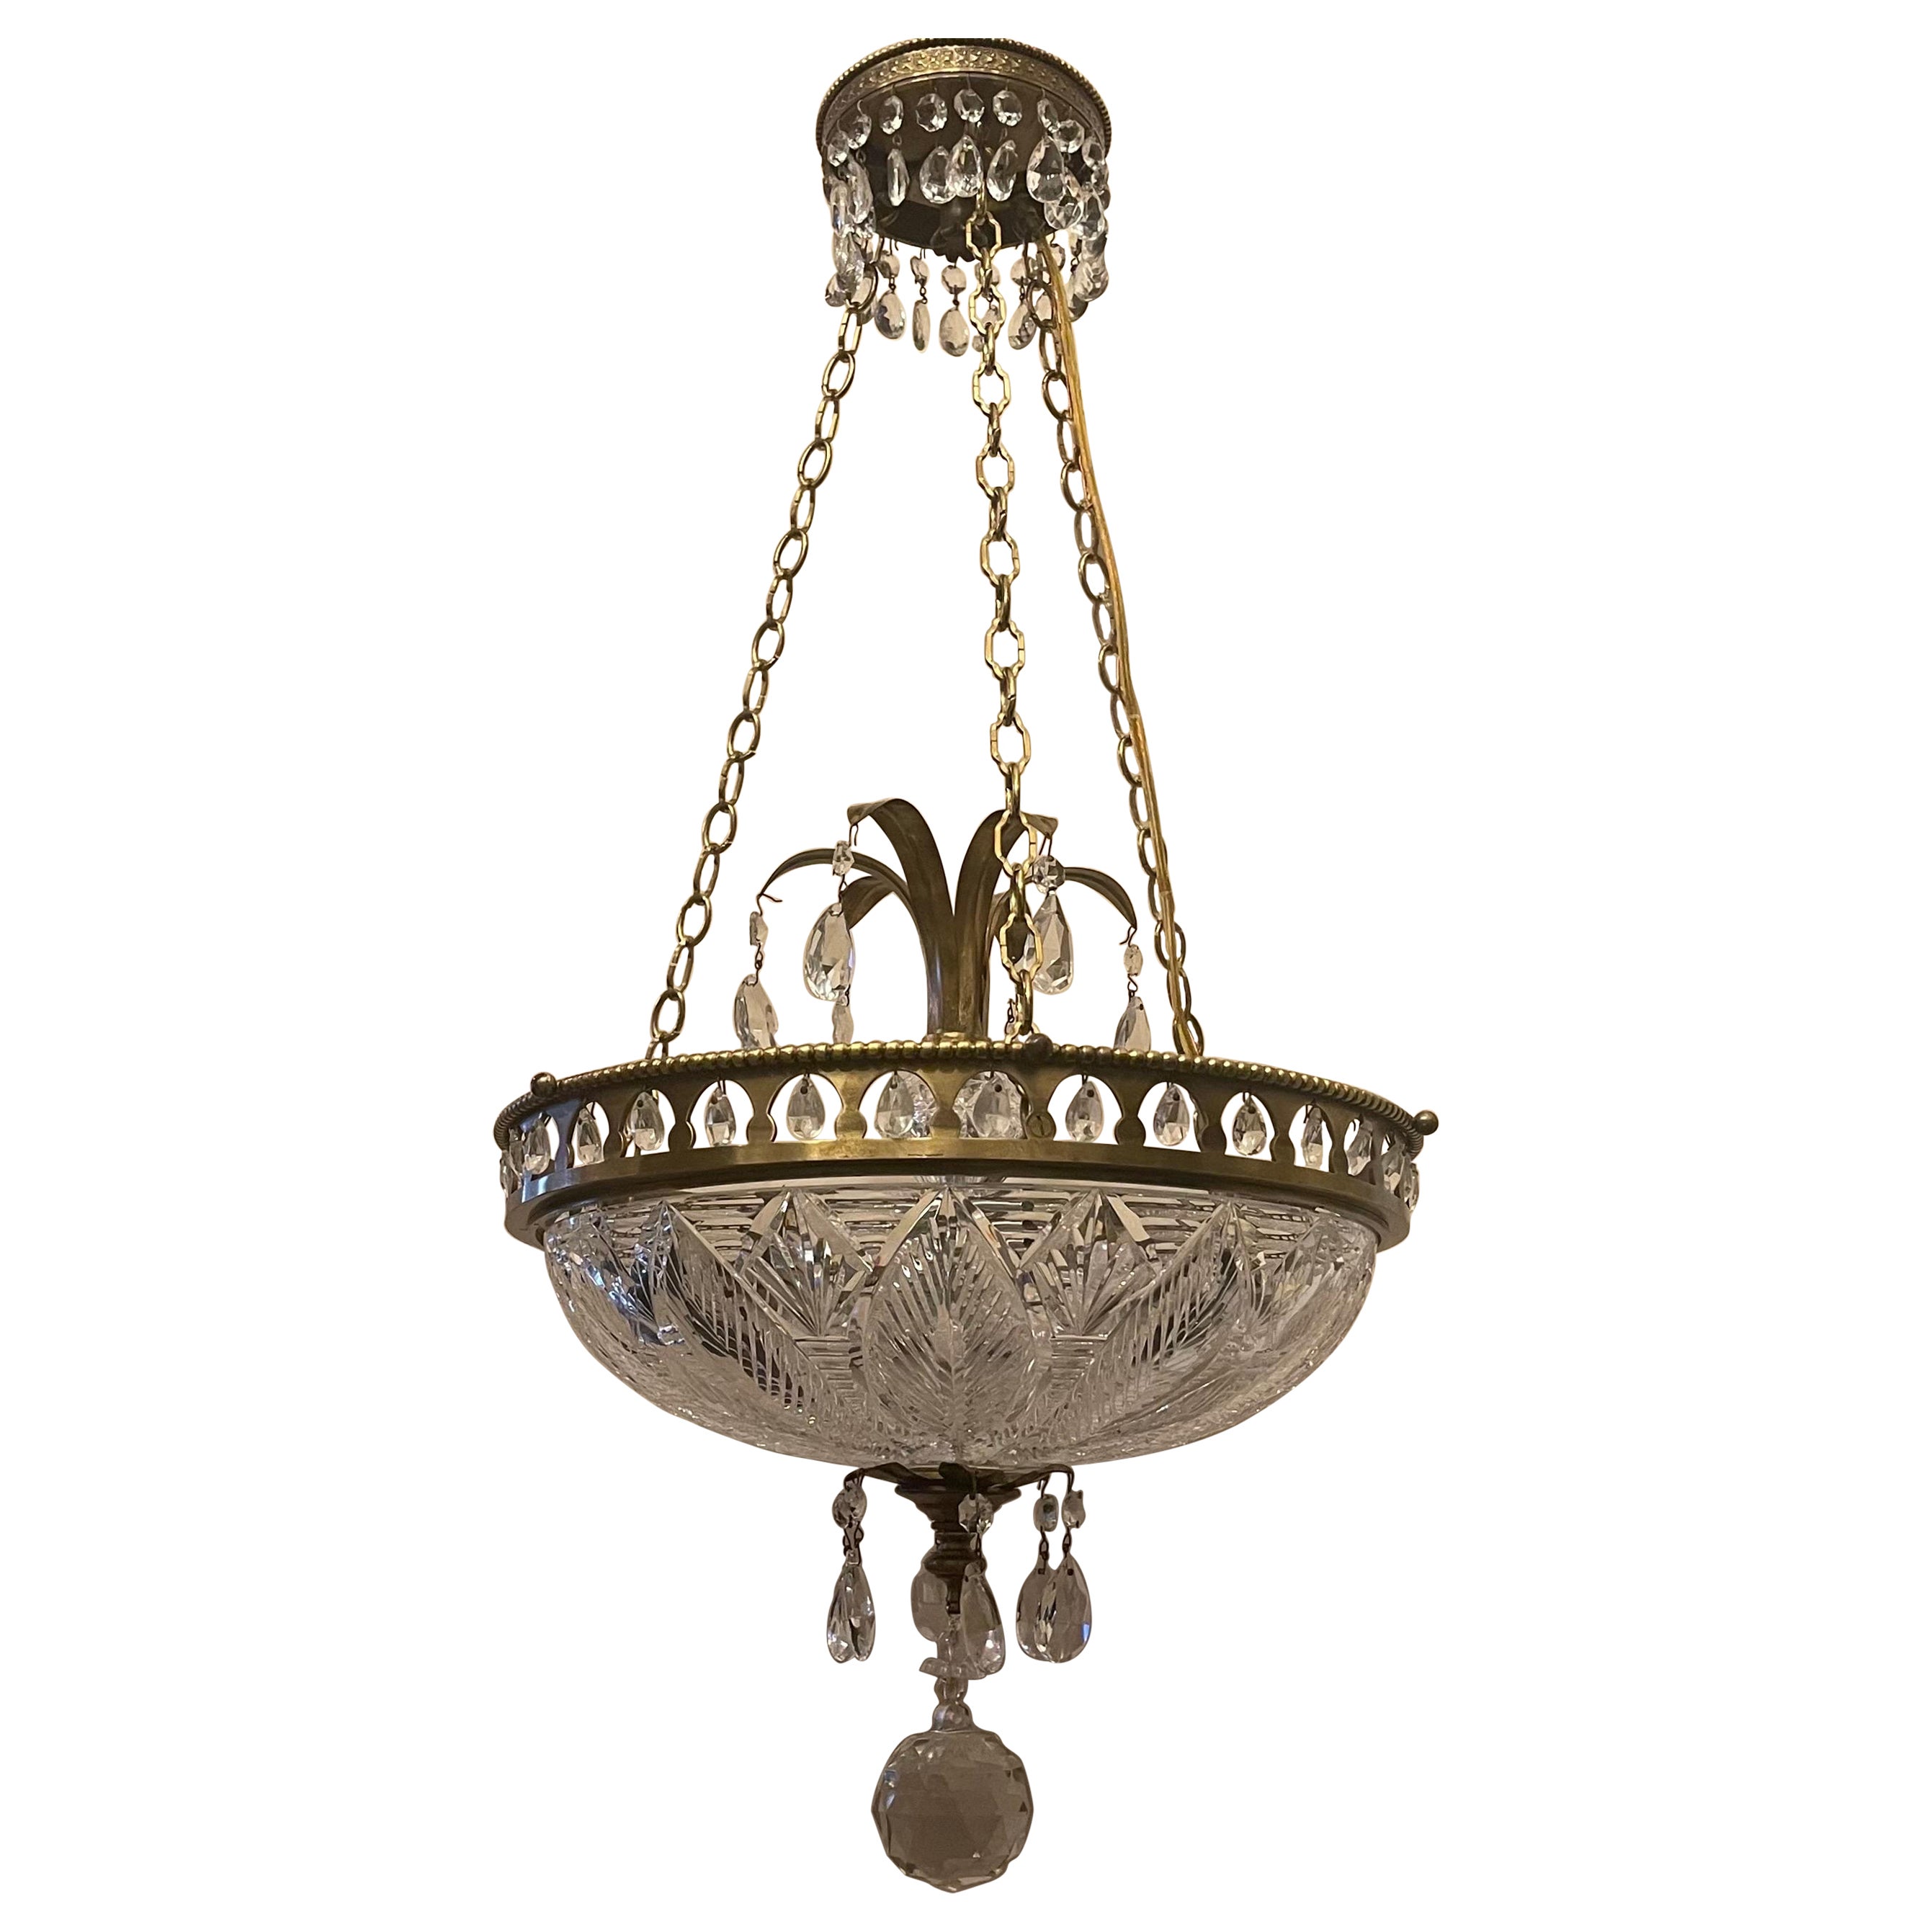 Wonderful Neoclassical Etched Cut-Crystal Bowl Bronze Chandelier Ormolu Fixture For Sale